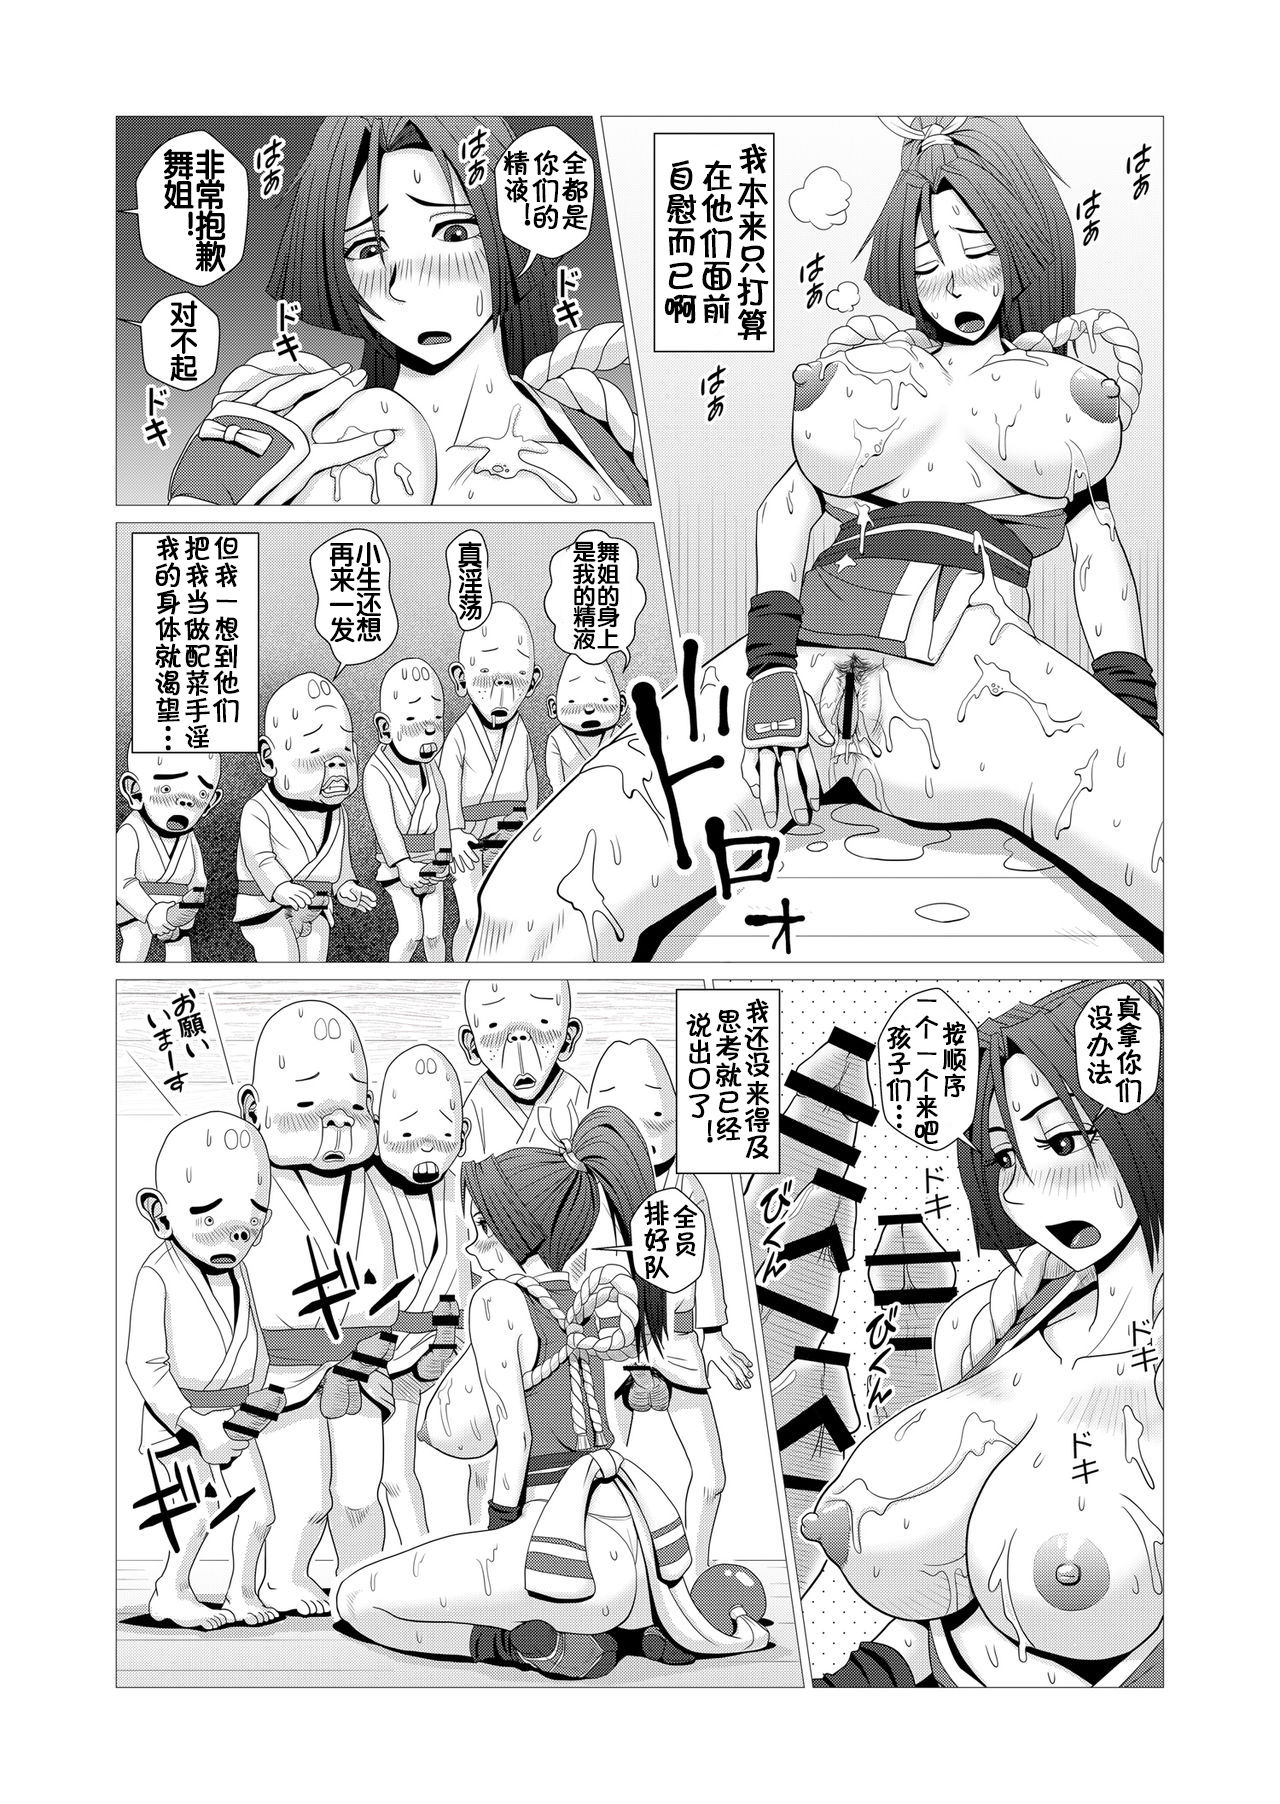 [Falcon115 (Forester)] Maidono no Ni (The King of Fighters) [Chinese] [流木个人汉化] page 8 full